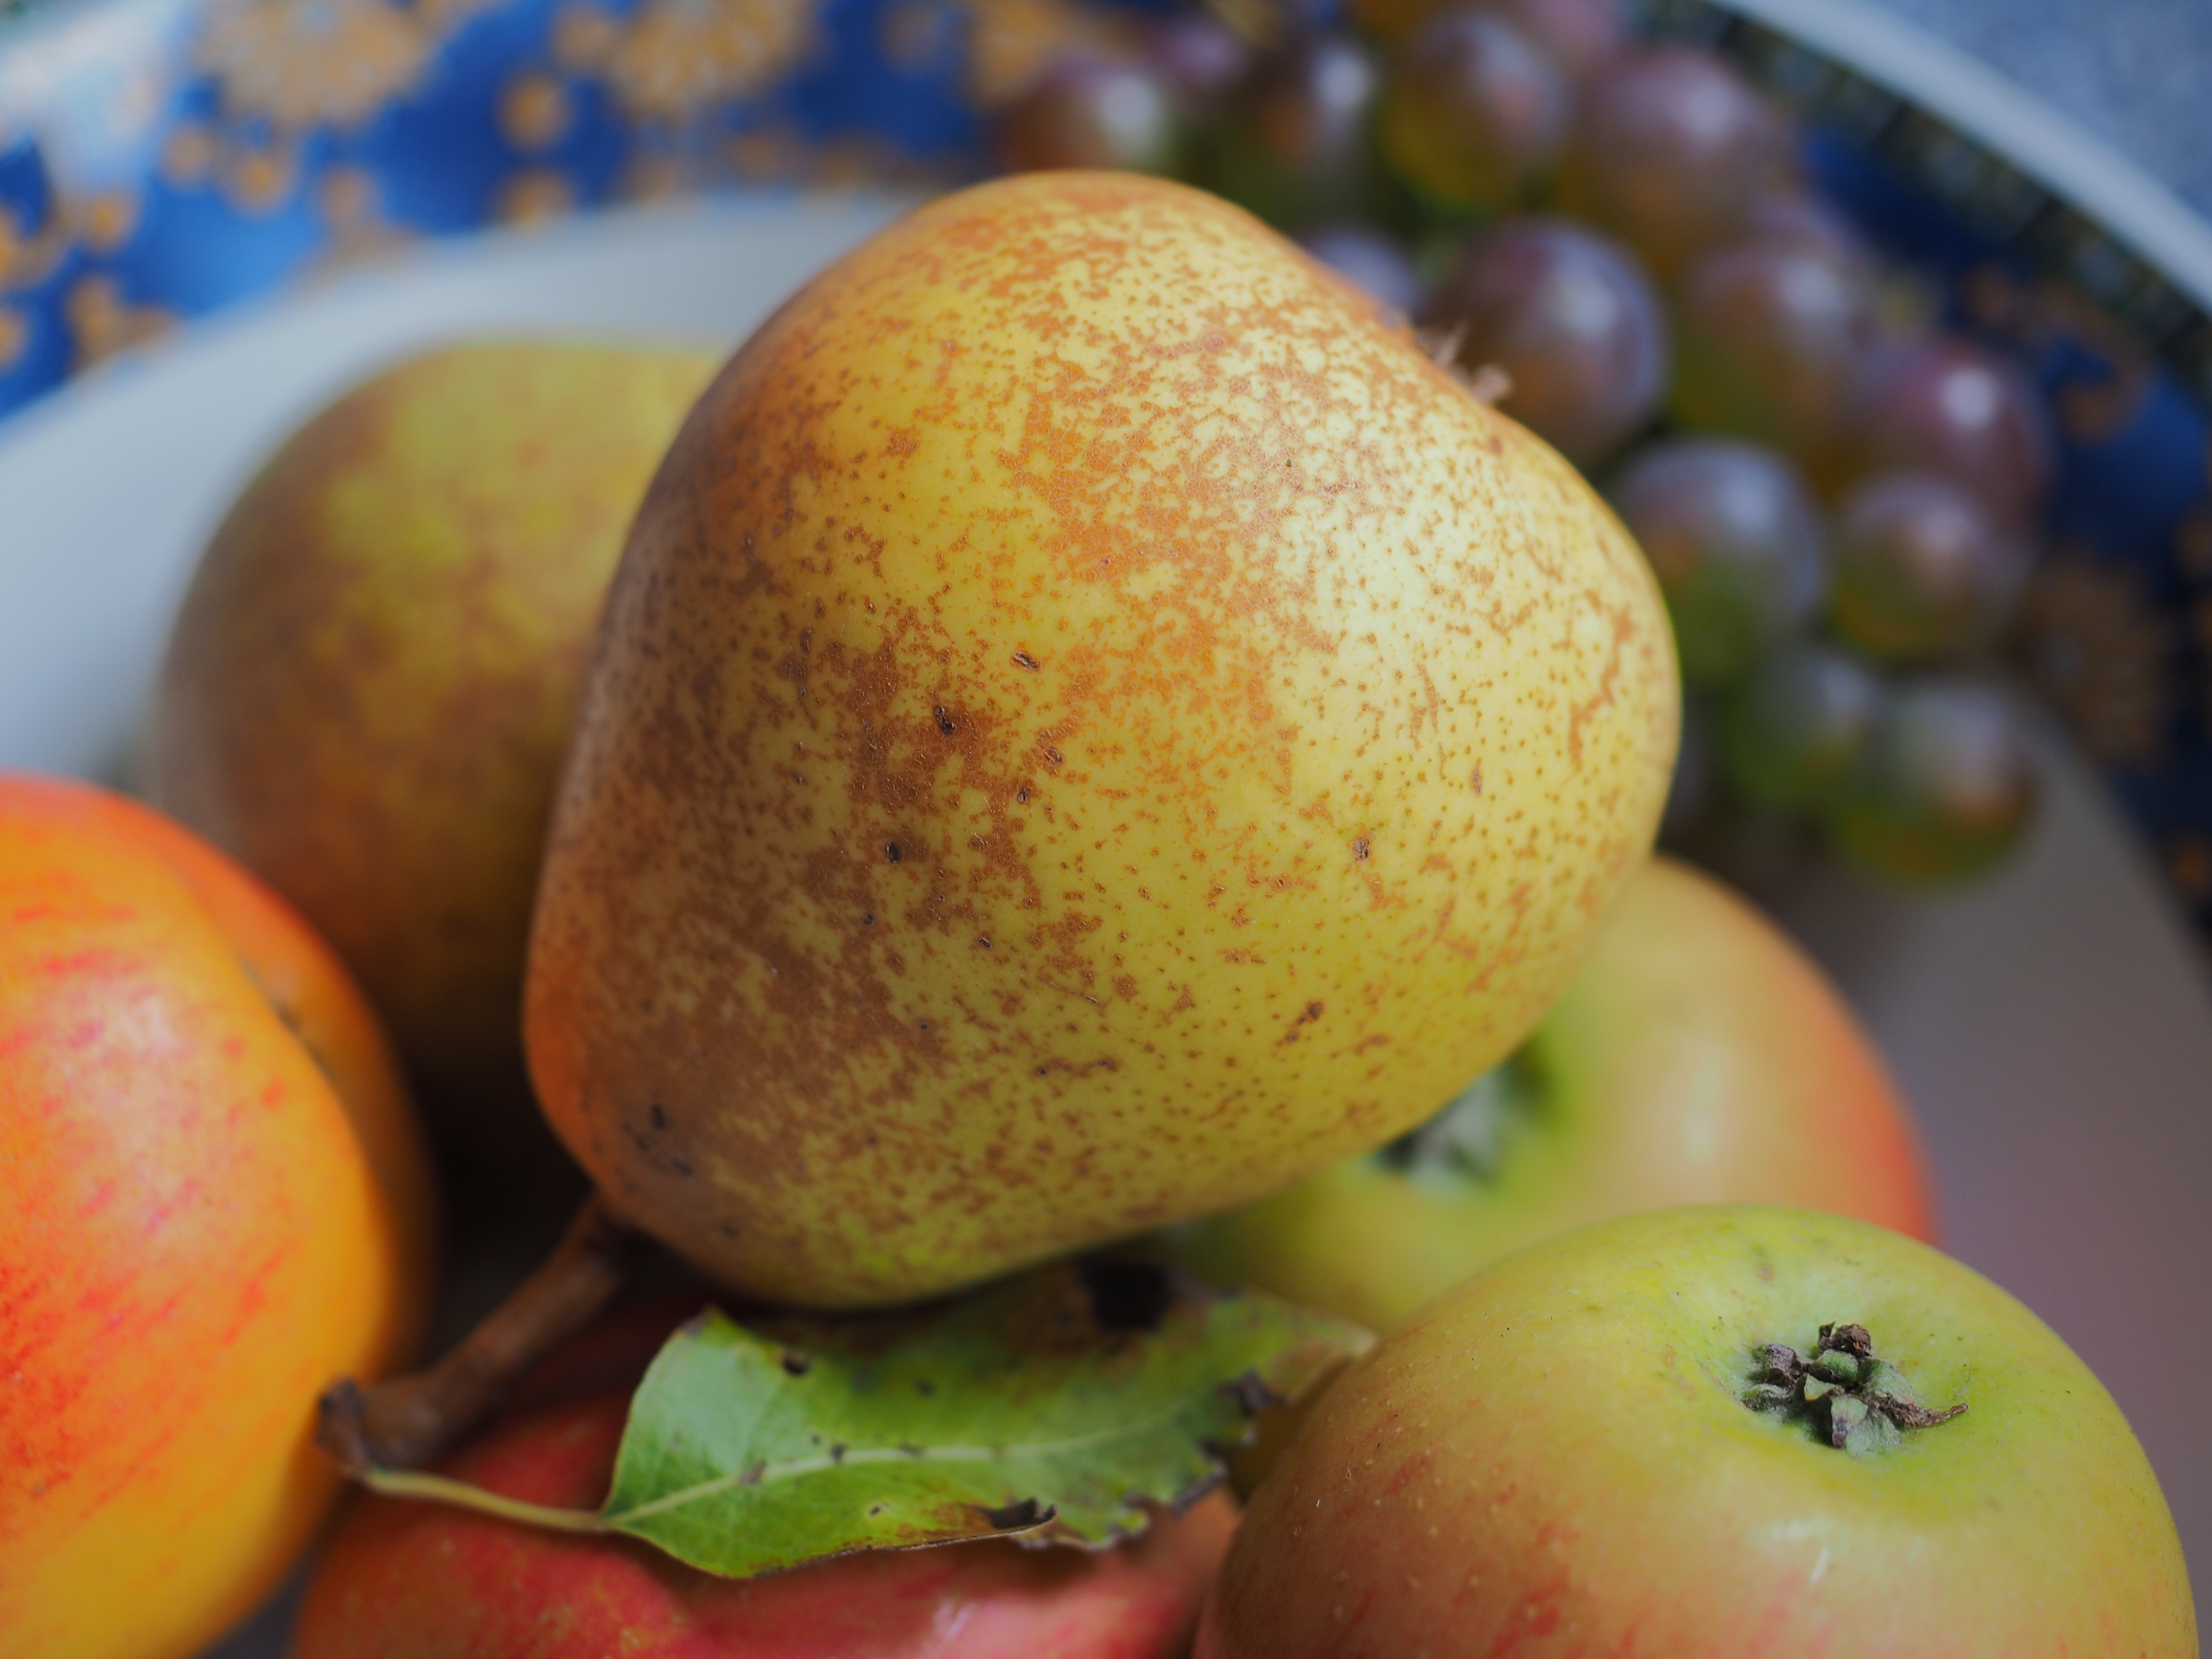 Pear, Vitamins, Green, Fruit, Fruits, food and drink, fruit